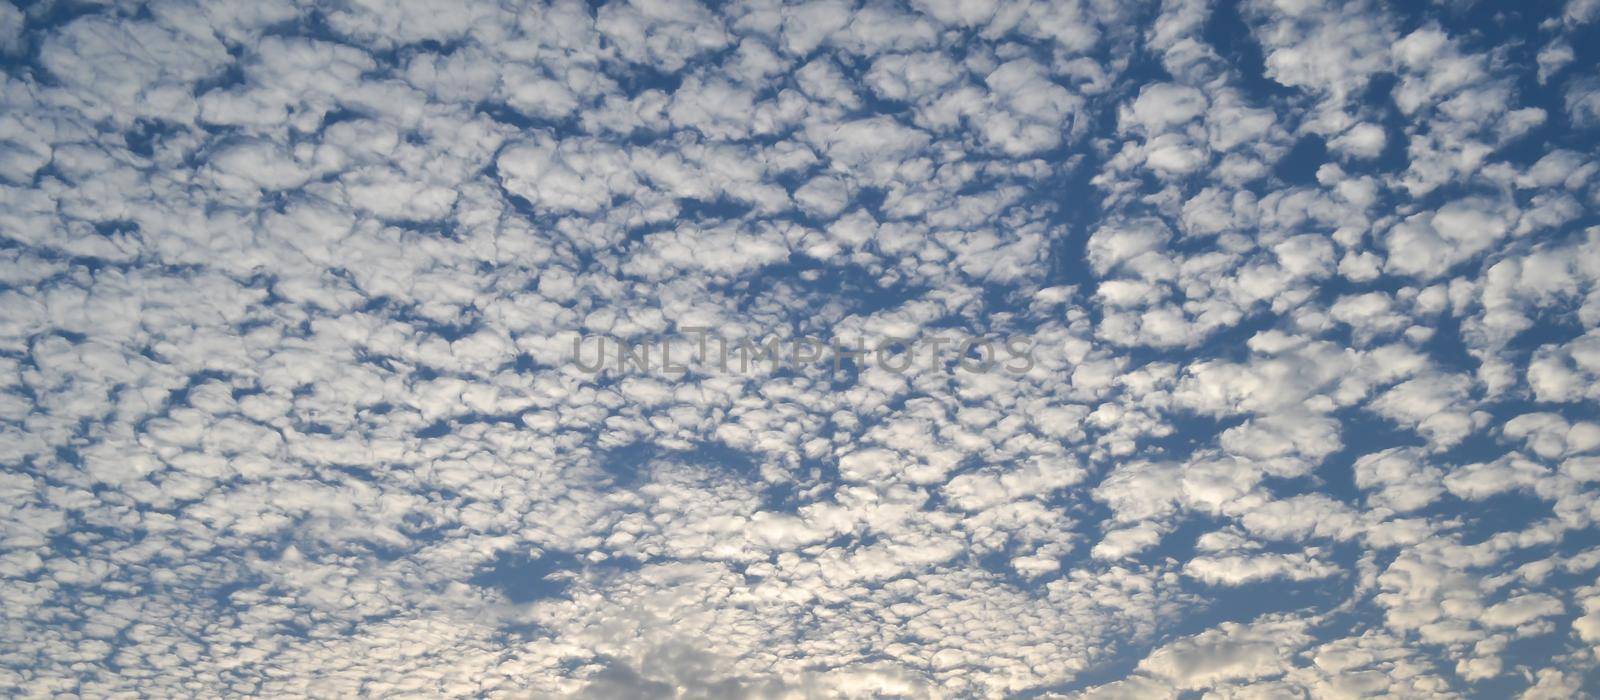 Cloud sky background. Beautiful cotton clouds floating in sunset sky. Dramatic atmospheric mood. Beauty in nature.